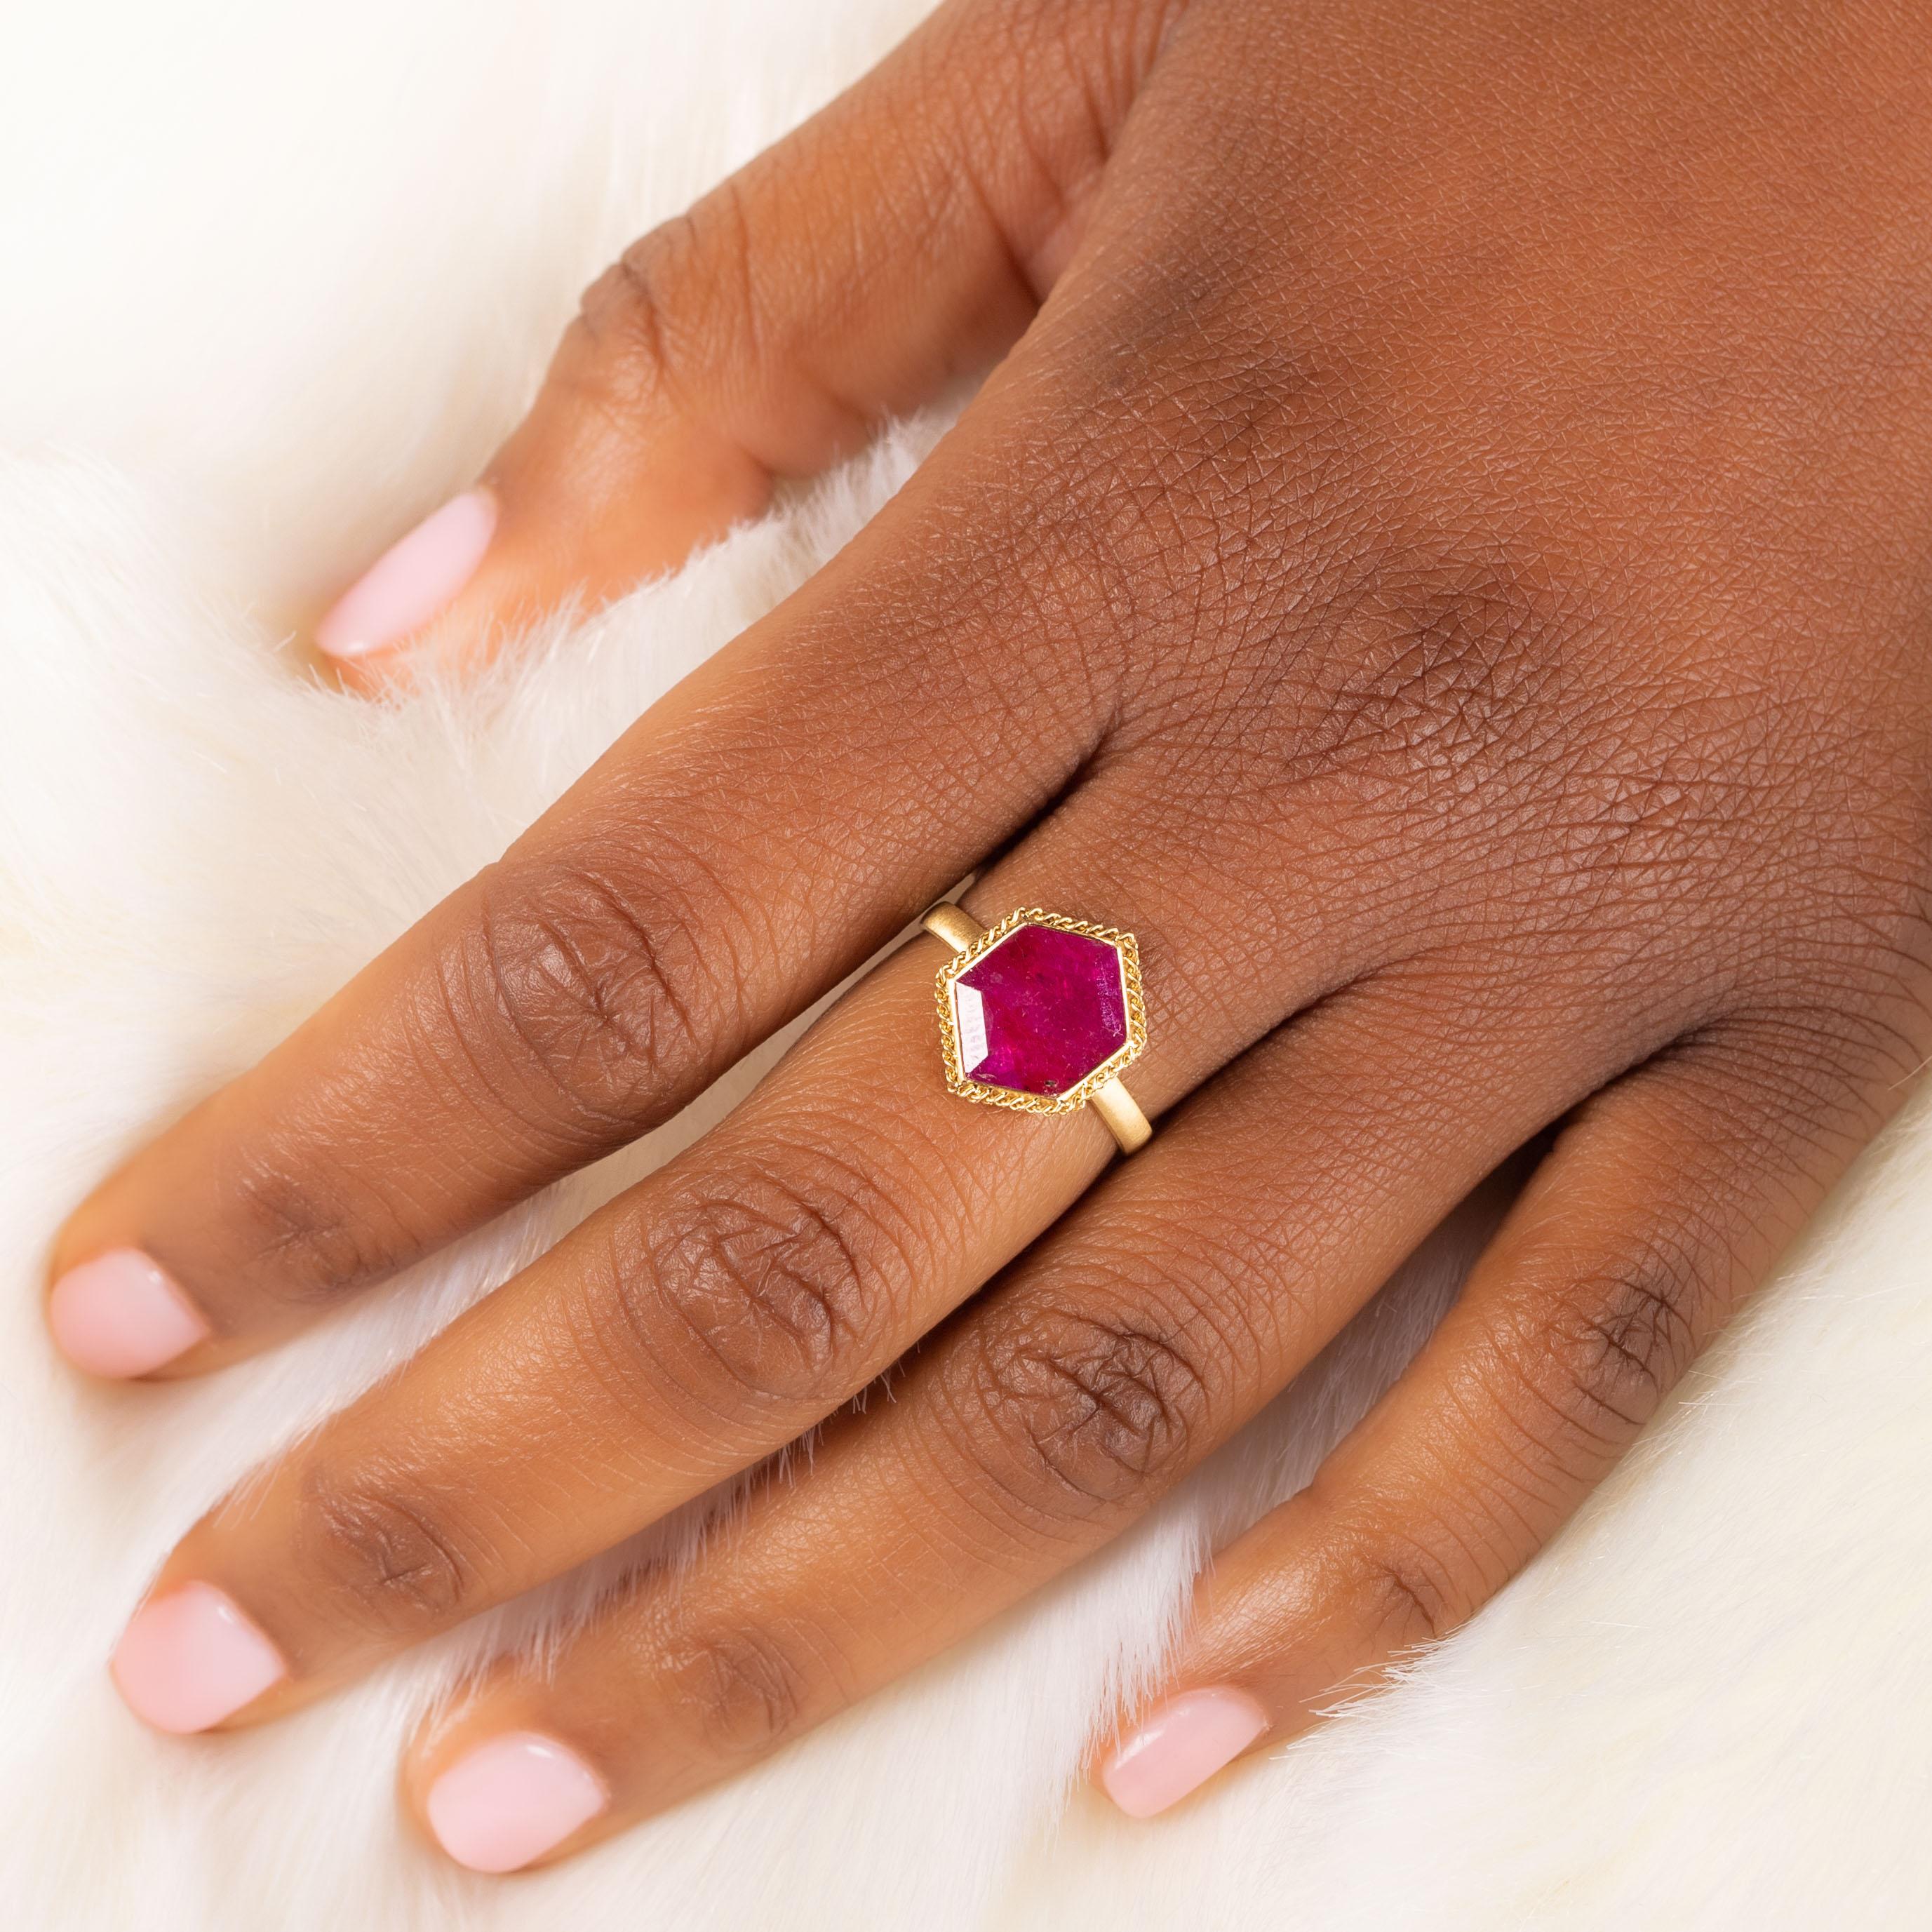 This Ruby ring looks like it came straight out of a pirate’s treasure chest with its hexagonal shape and faceted surface that catches the light and glistens. This gemstone is set in a handmade, 18k gold bezel with braided detail and granulated